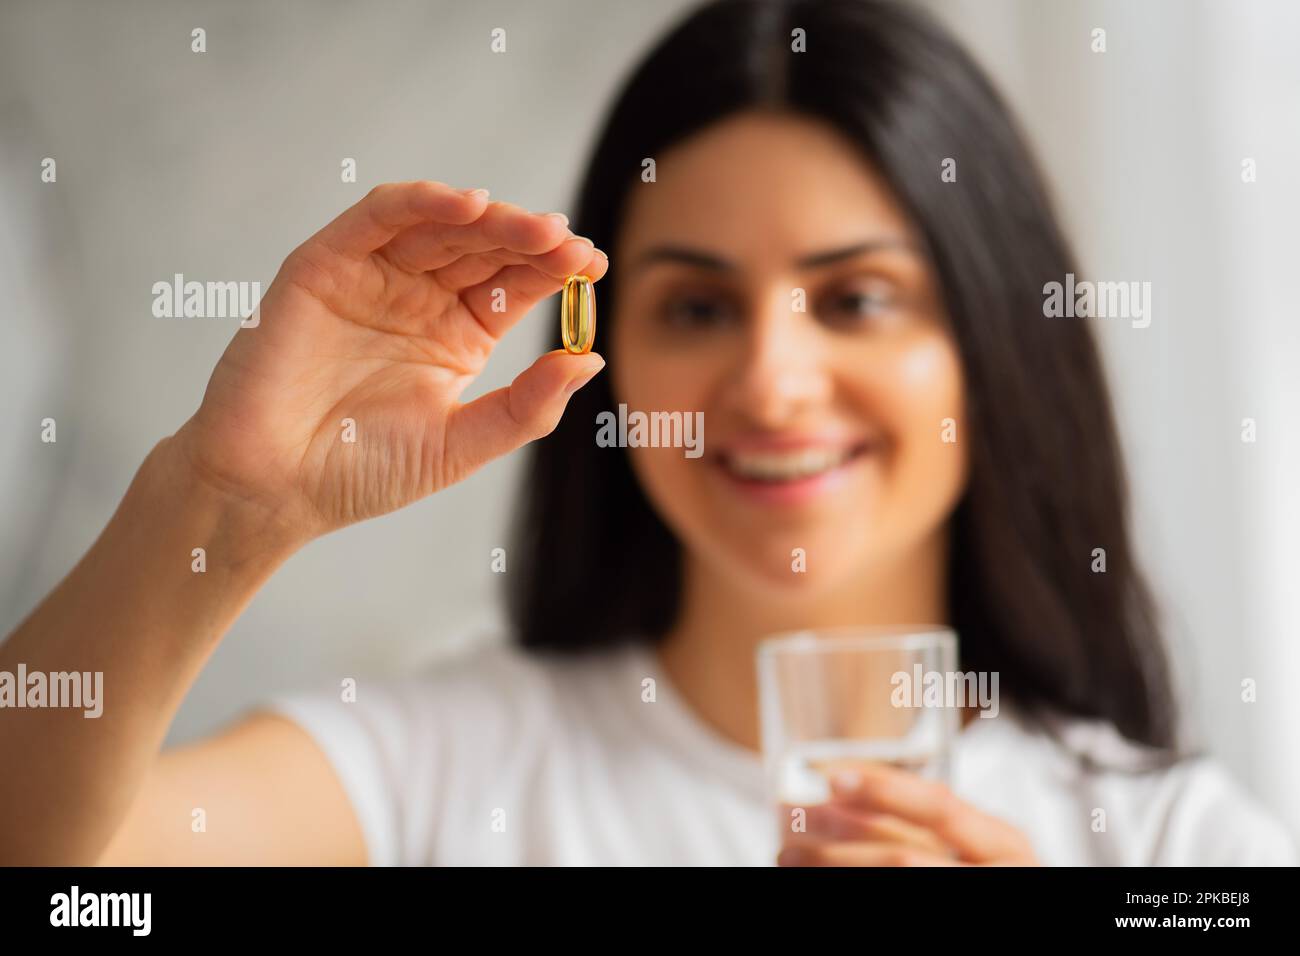 Multiracial Asian smiling young woman taking a Fish Oil Omega-3 capsule at home with beautiful white teeth, Healthy lifestyle food dietary supplements Stock Photo